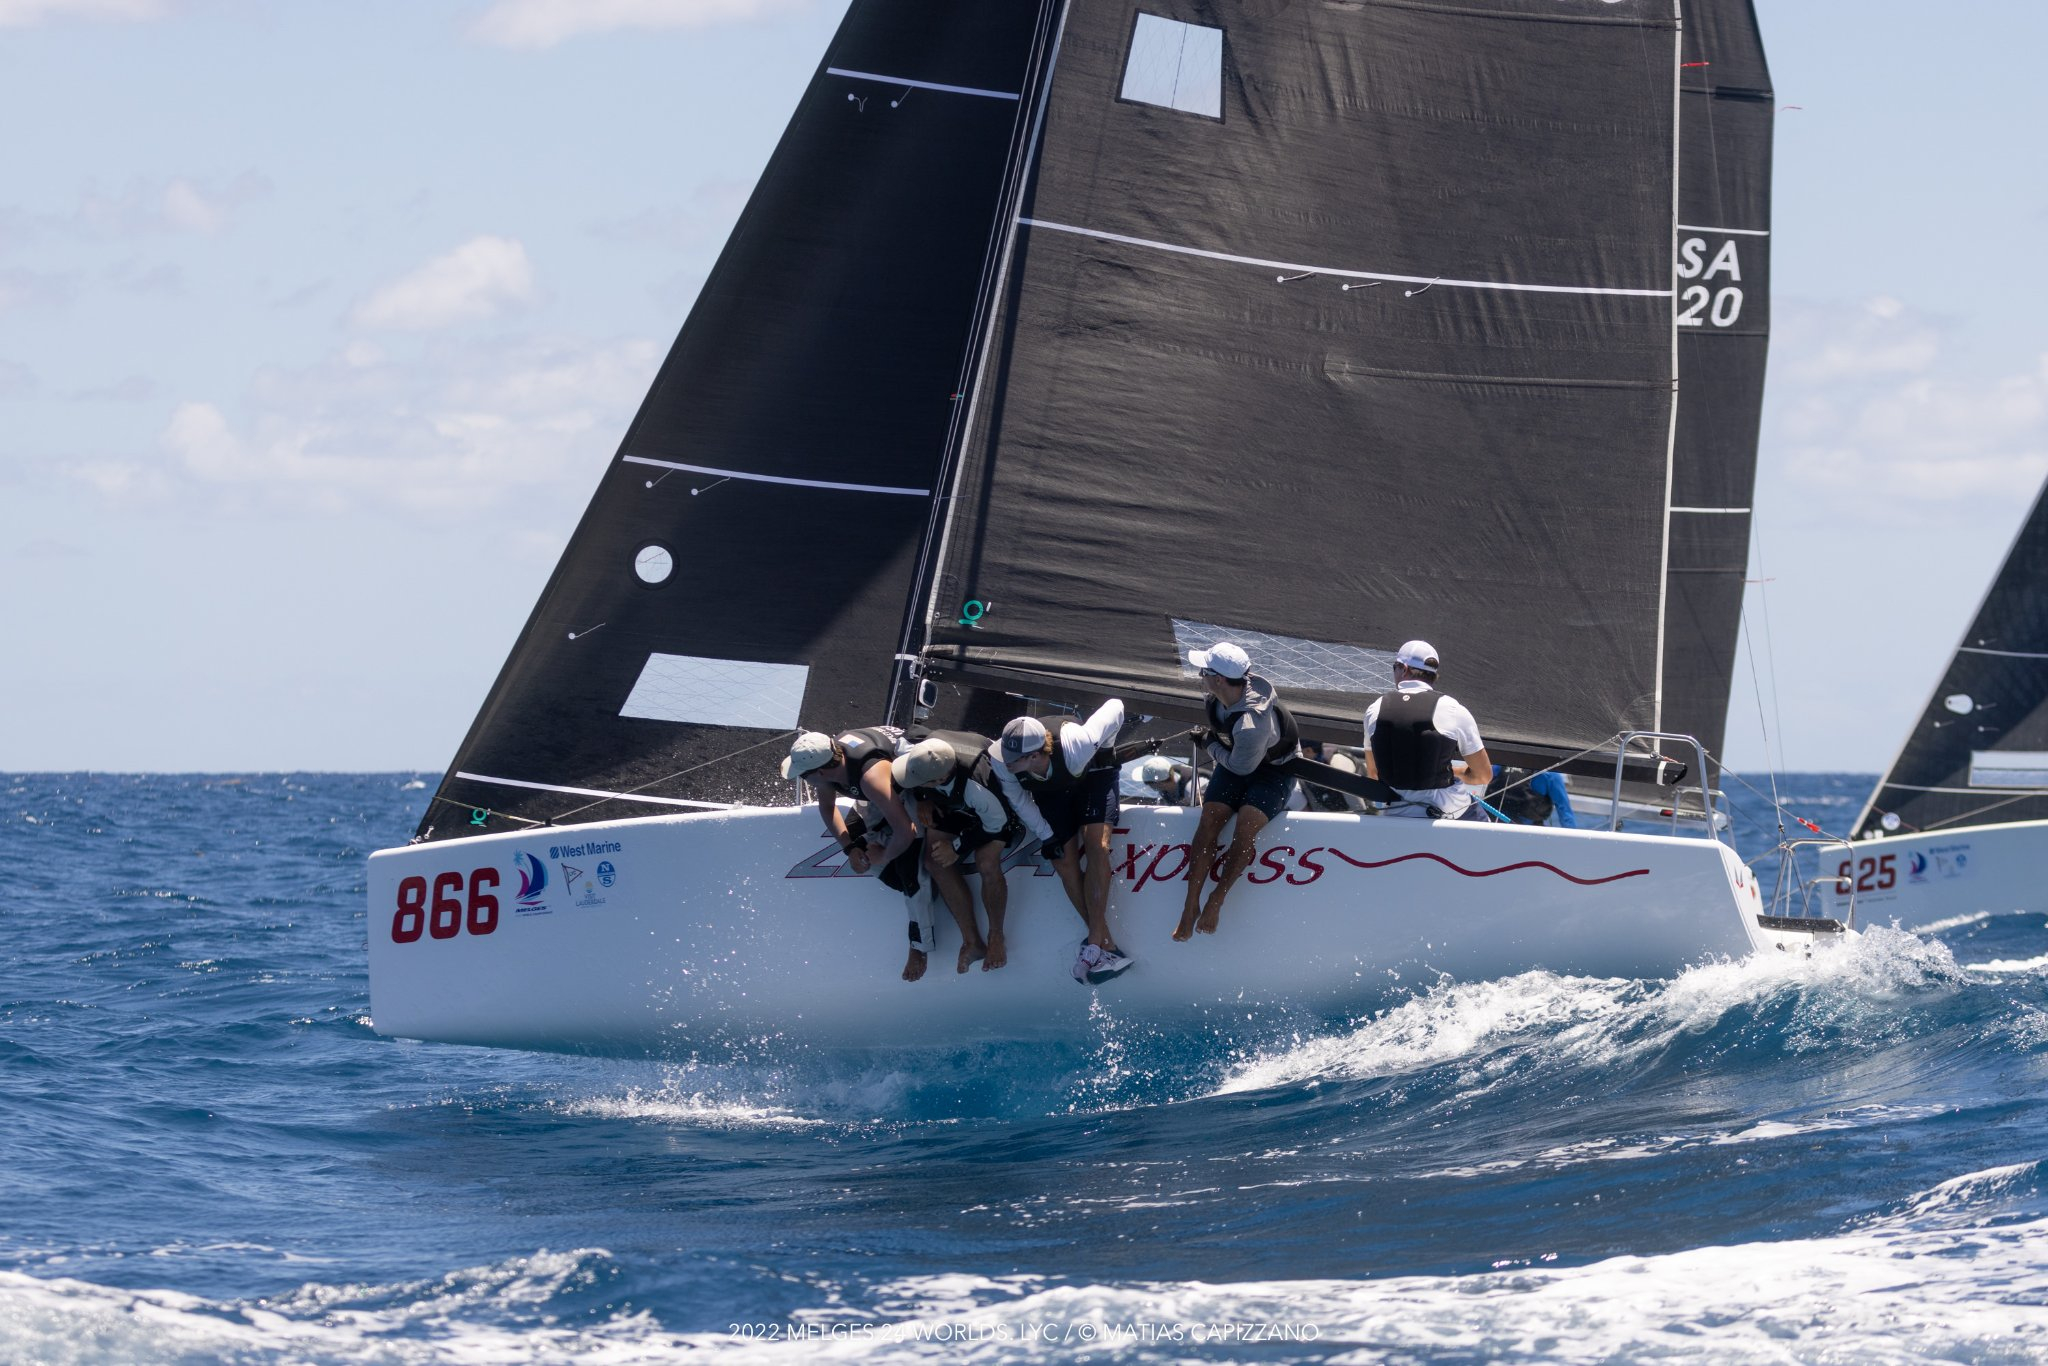  Melges 24  World Championship 2022  Fort Lauderdale FL, USA  First races today